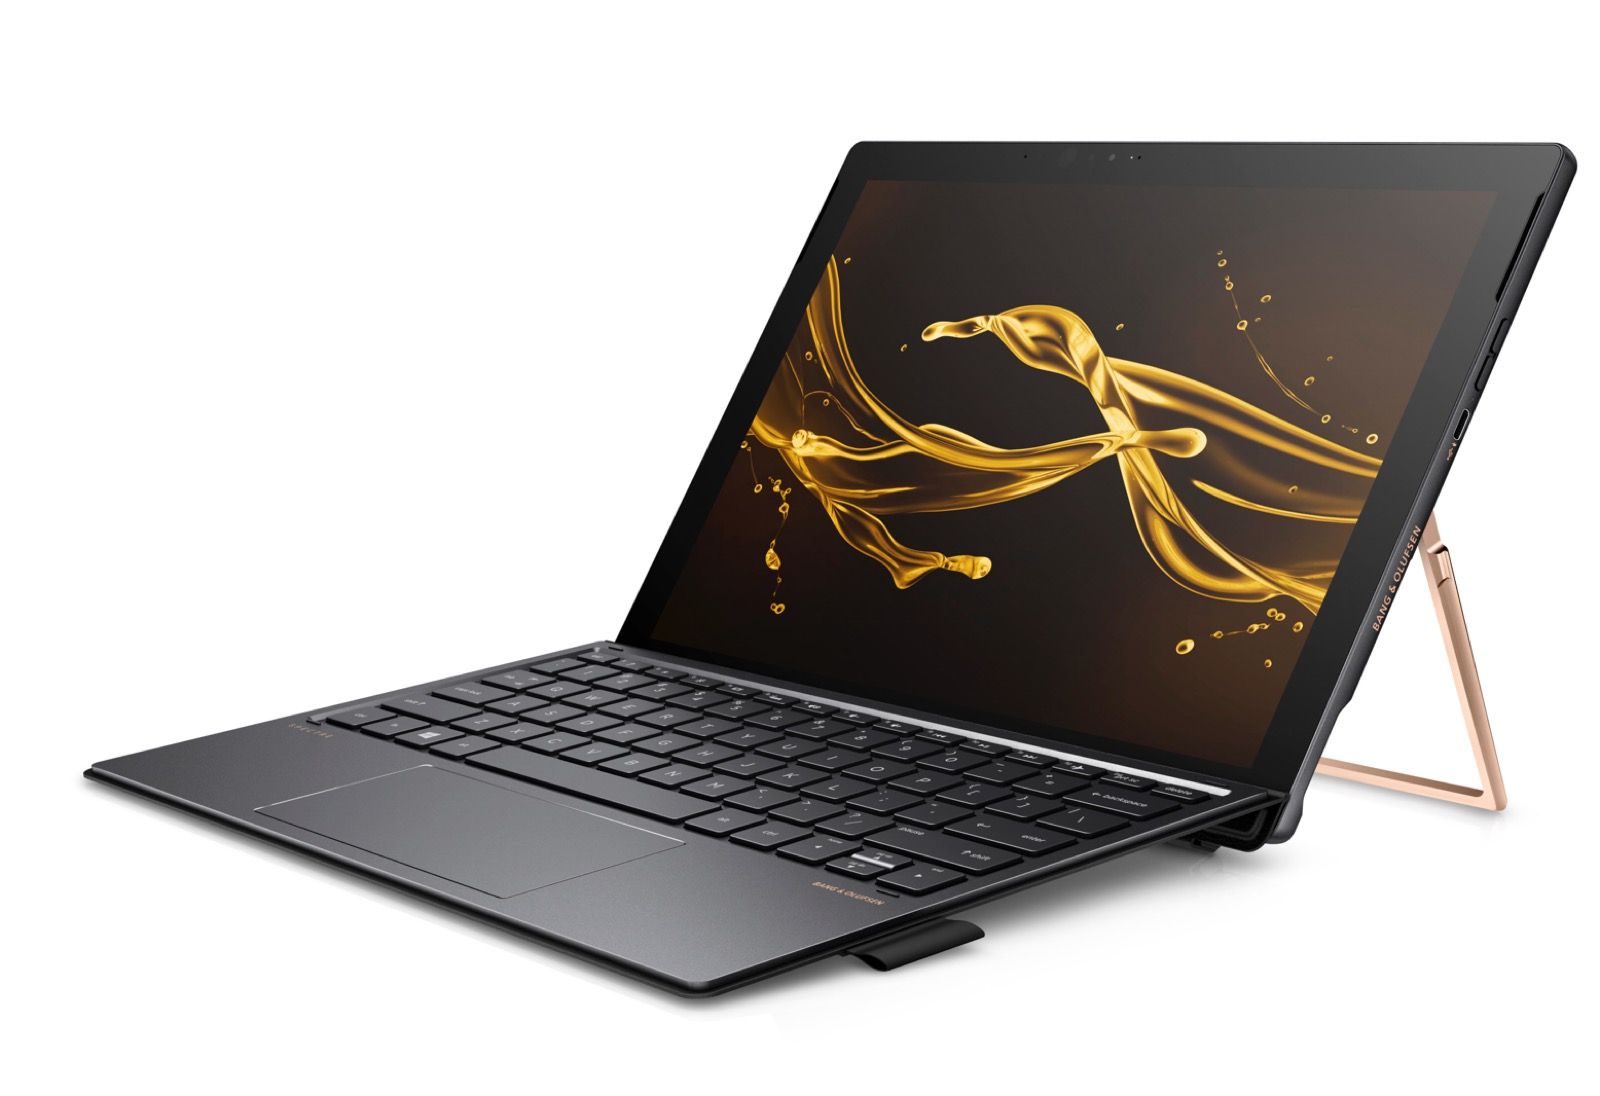 the refreshed hp spectre x2 2 in 1 is more powerful than ever image 1